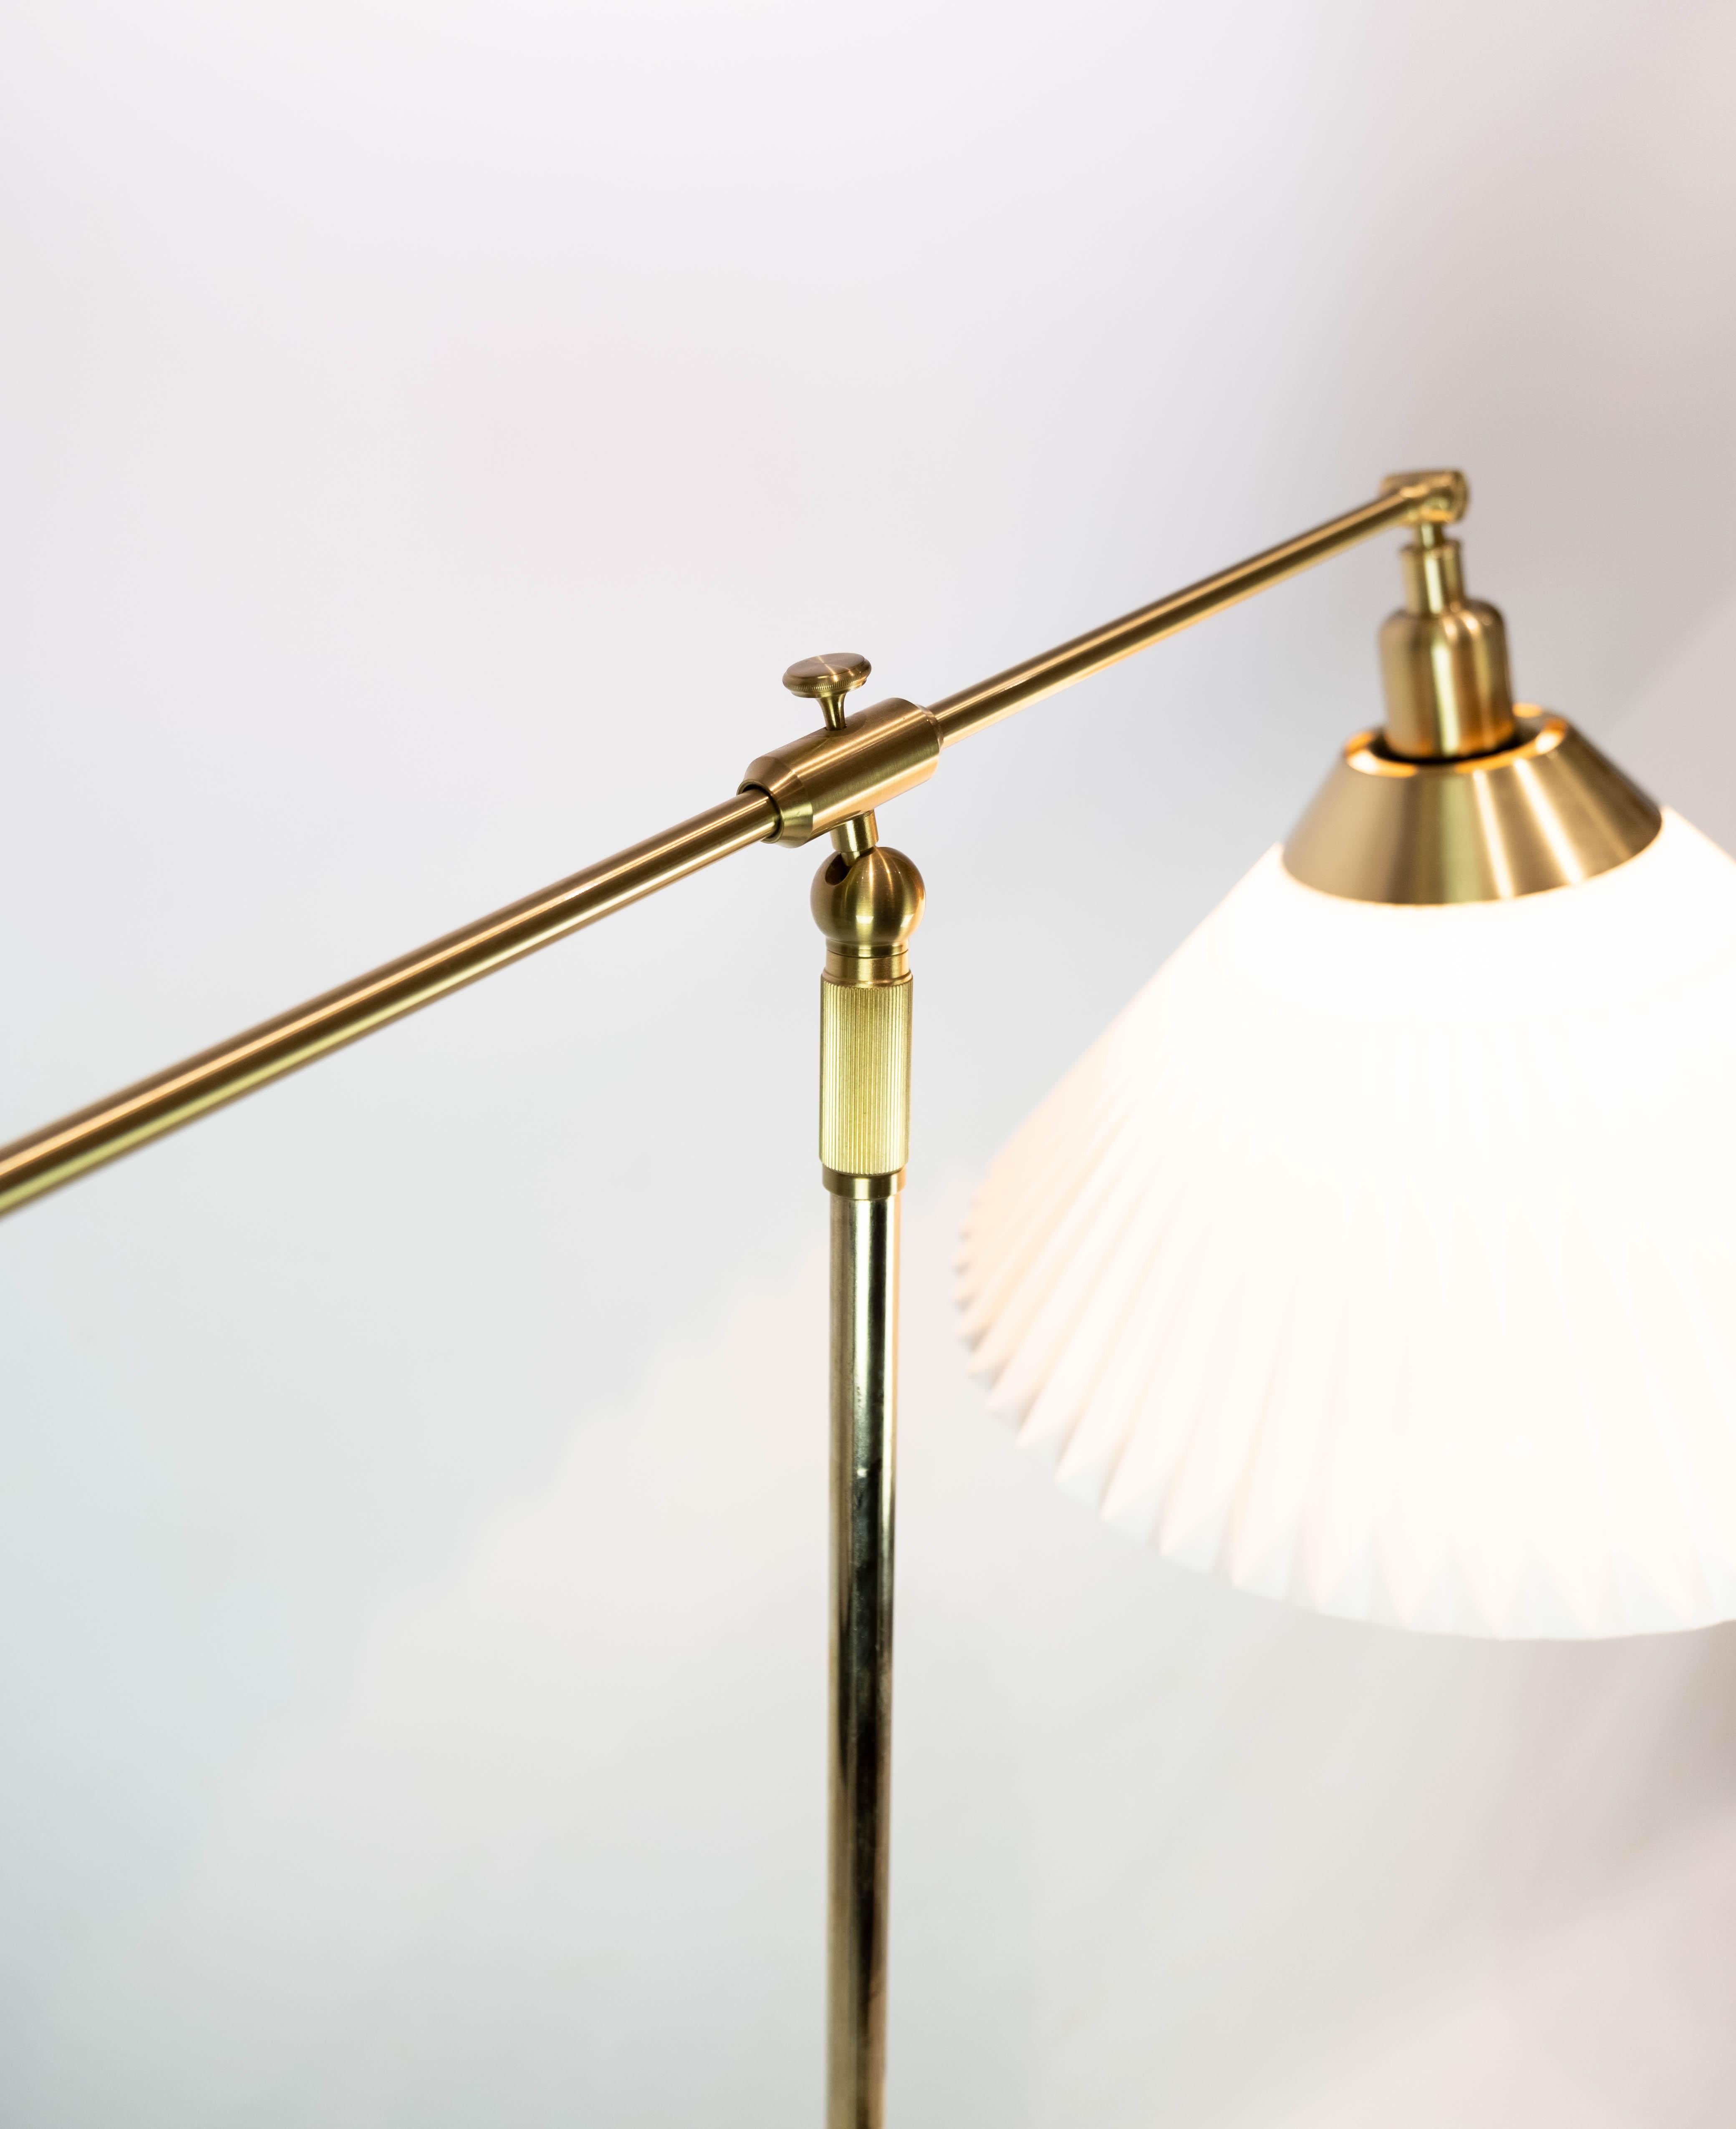 Mid-20th Century Floor Lamp, Model 349, in Brass and Black Metal, by Le Klint